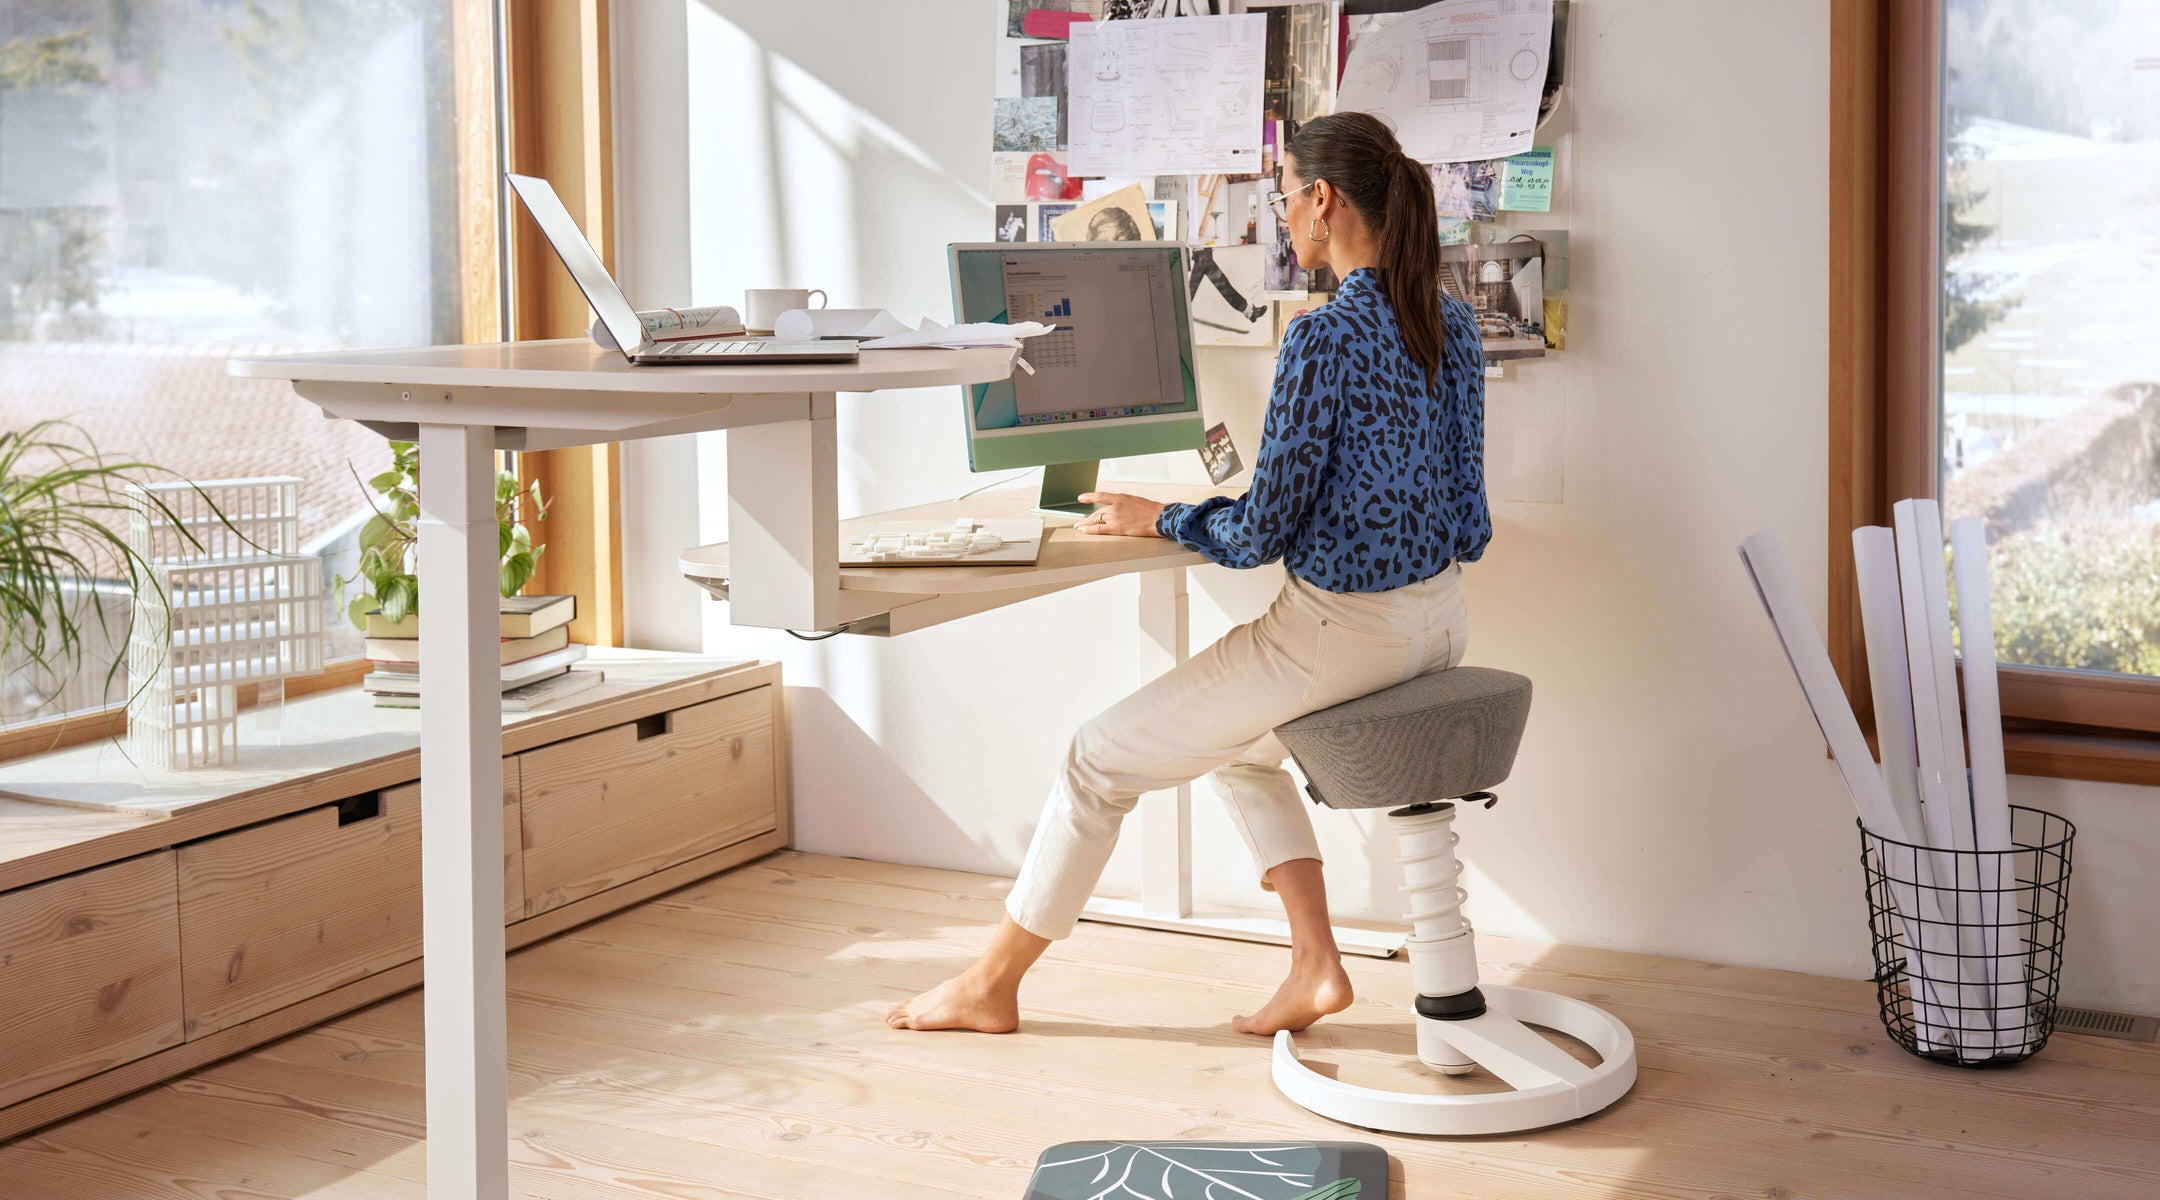 A woman is sitting on the Aeris Swopper at her double desk working on her laptop. She leans forward and the Swopper seat follows her movement.